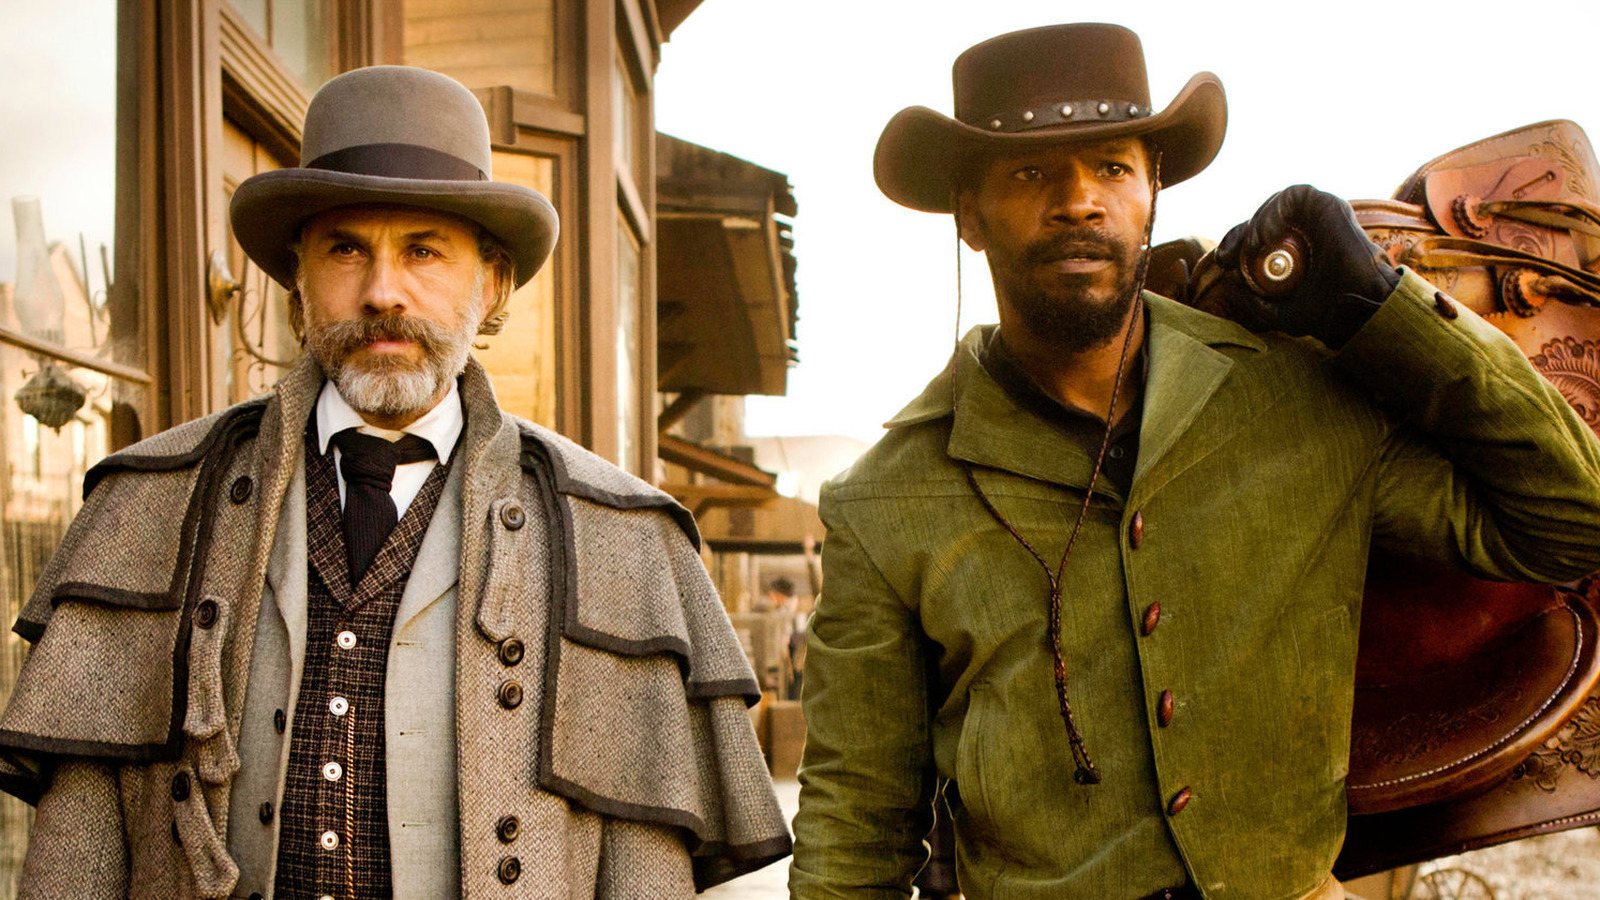 Quentin Tarantino's work on The Hateful Eight began as a continuation of Django Unchained